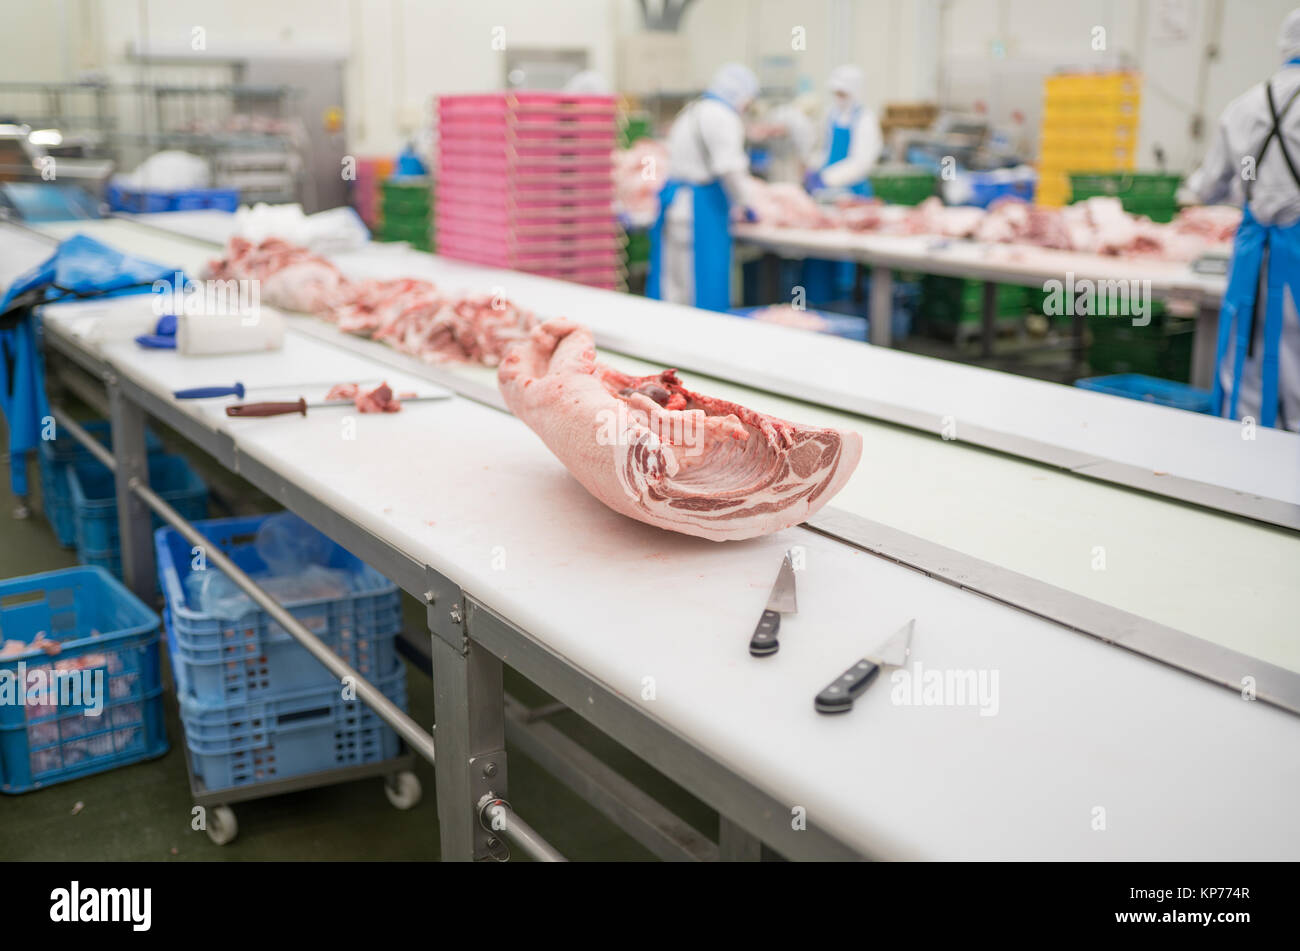 Pork being cut apart and prepared in a meat processing plant. Stock Photo